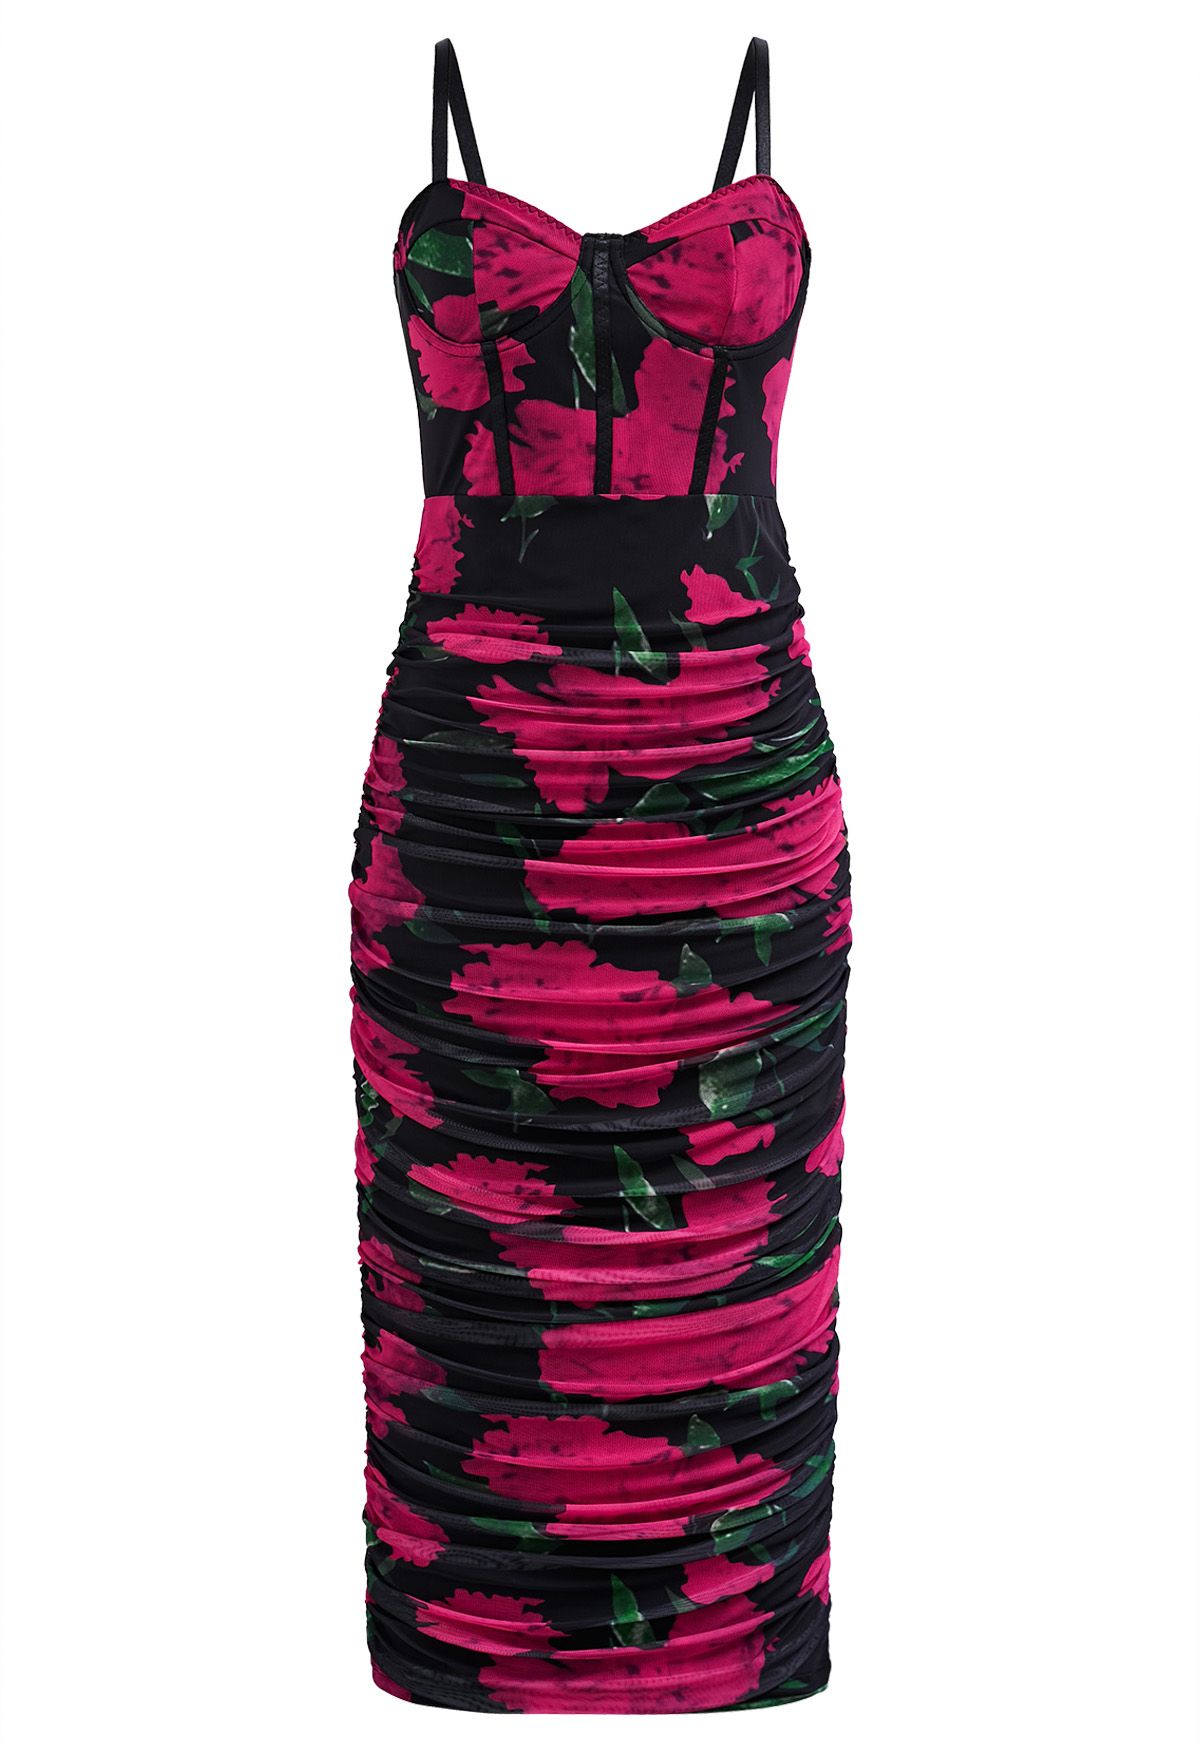 Hot Pink Floral Ruched Mesh Cami Dress